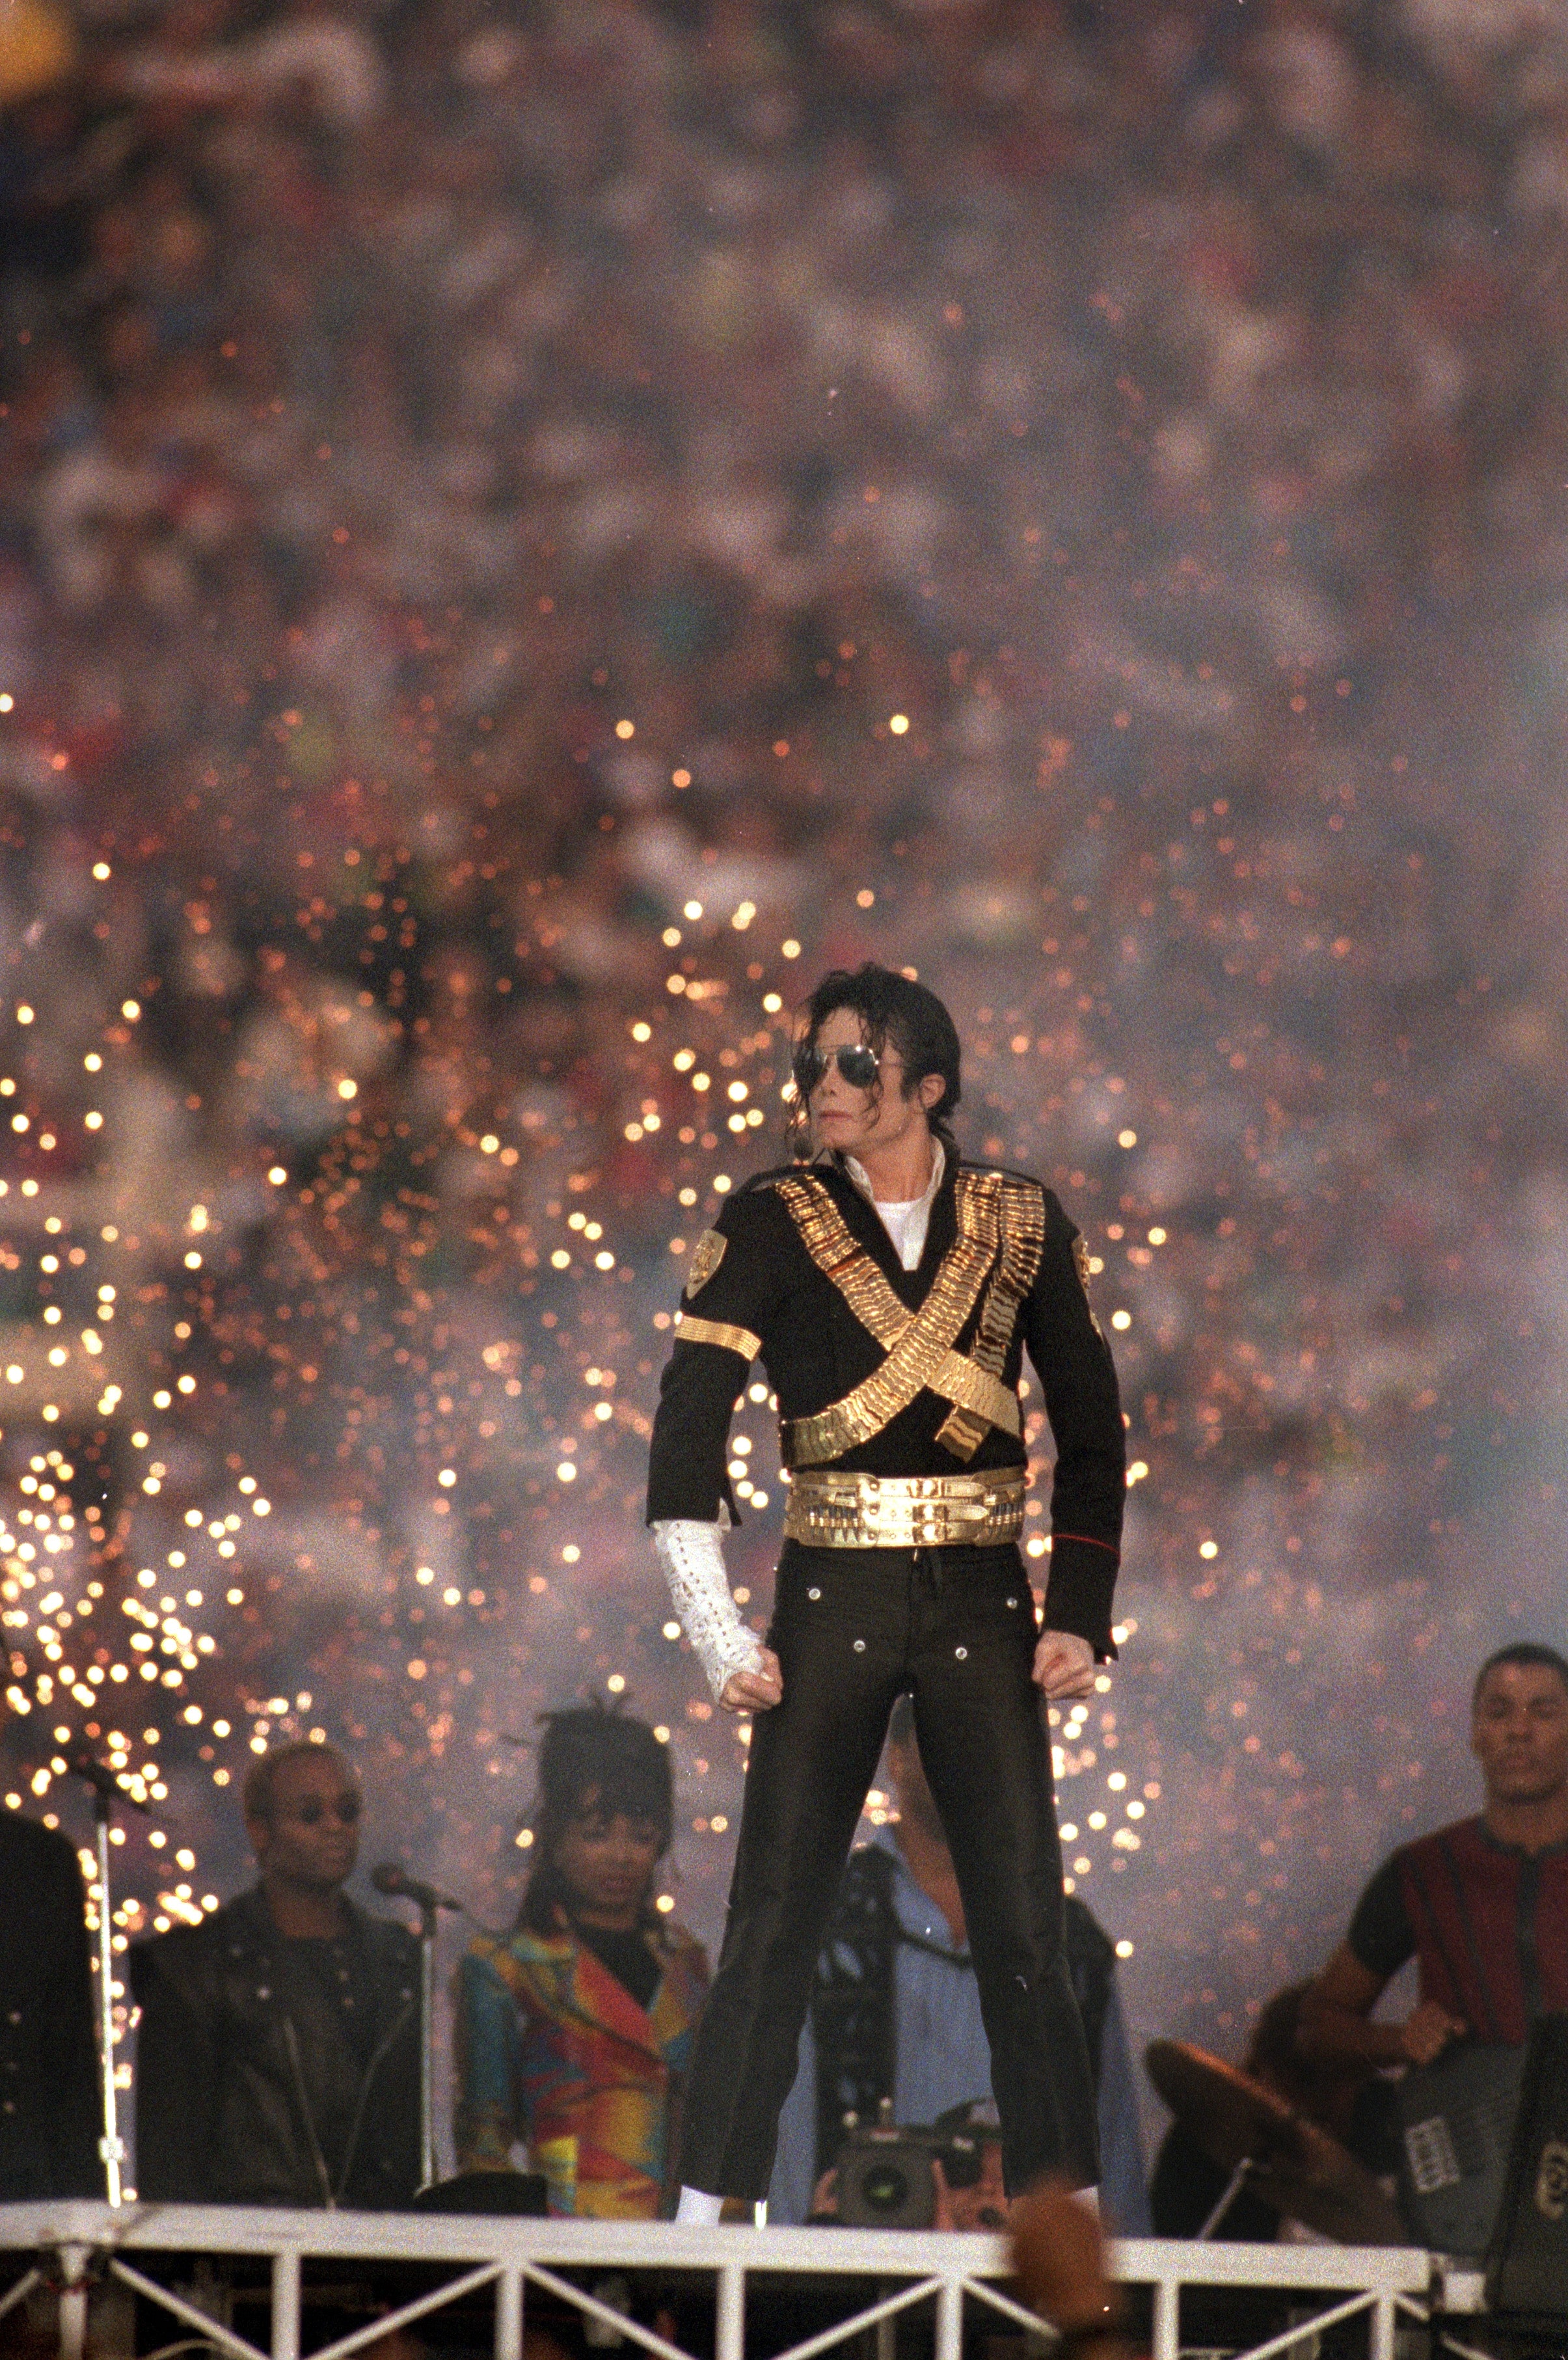 Michael Jackson wears a military-style jacket at the 1993 Super Bowl